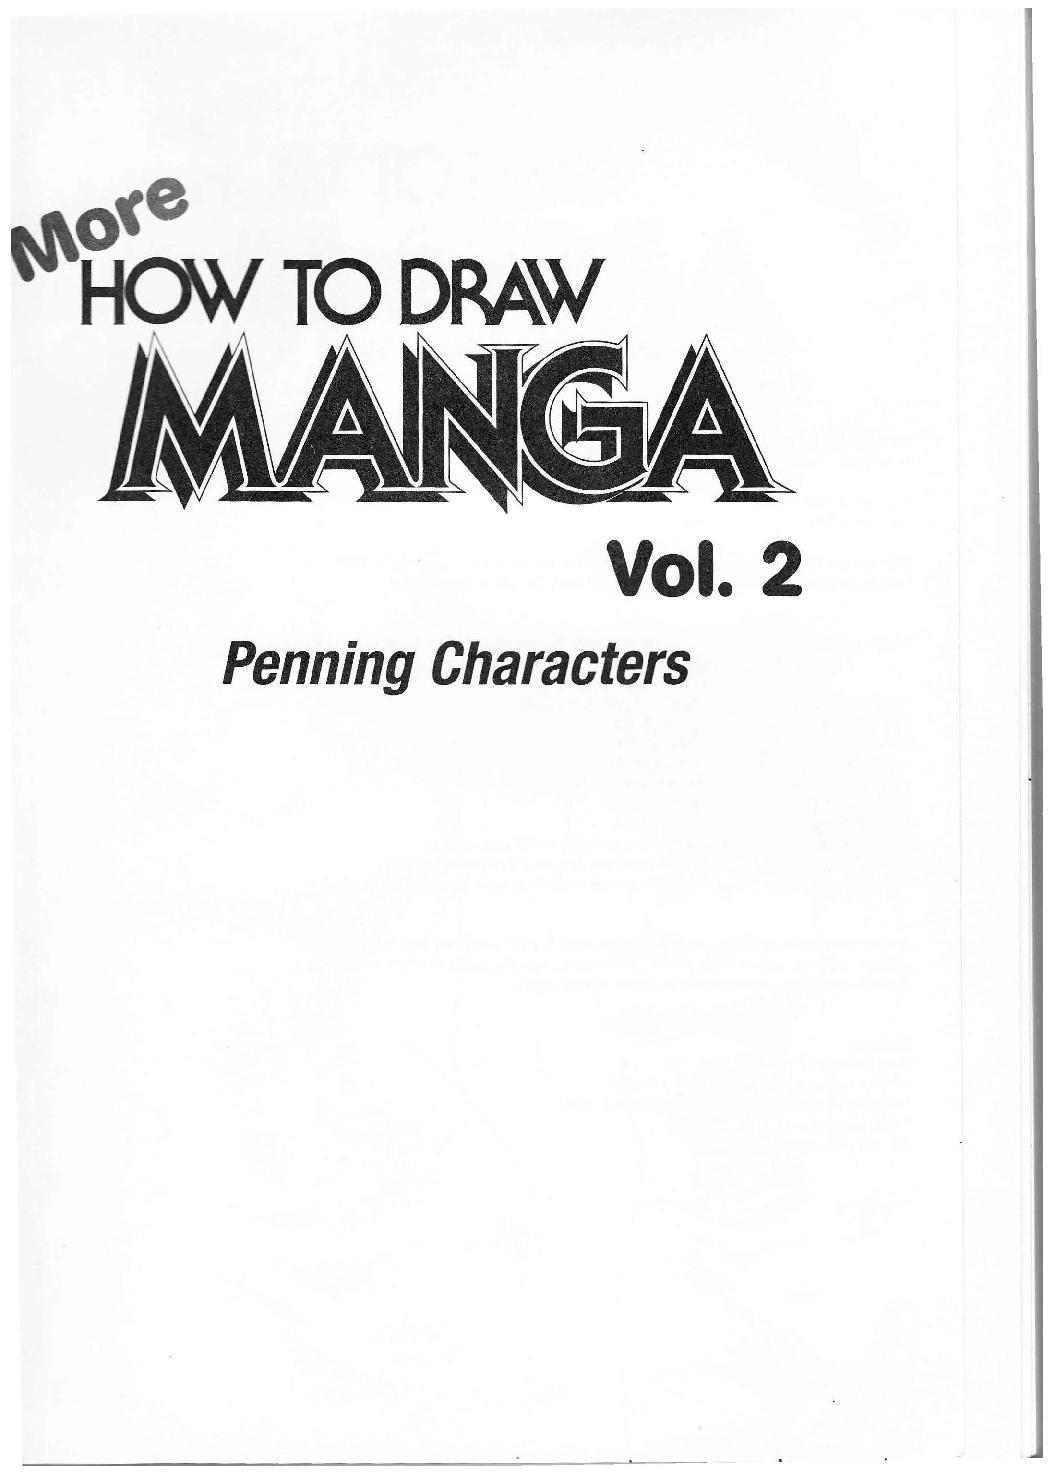 Flexible More How to Draw Manga Vol. 2 - Penning Characters Buttplug - Page 3